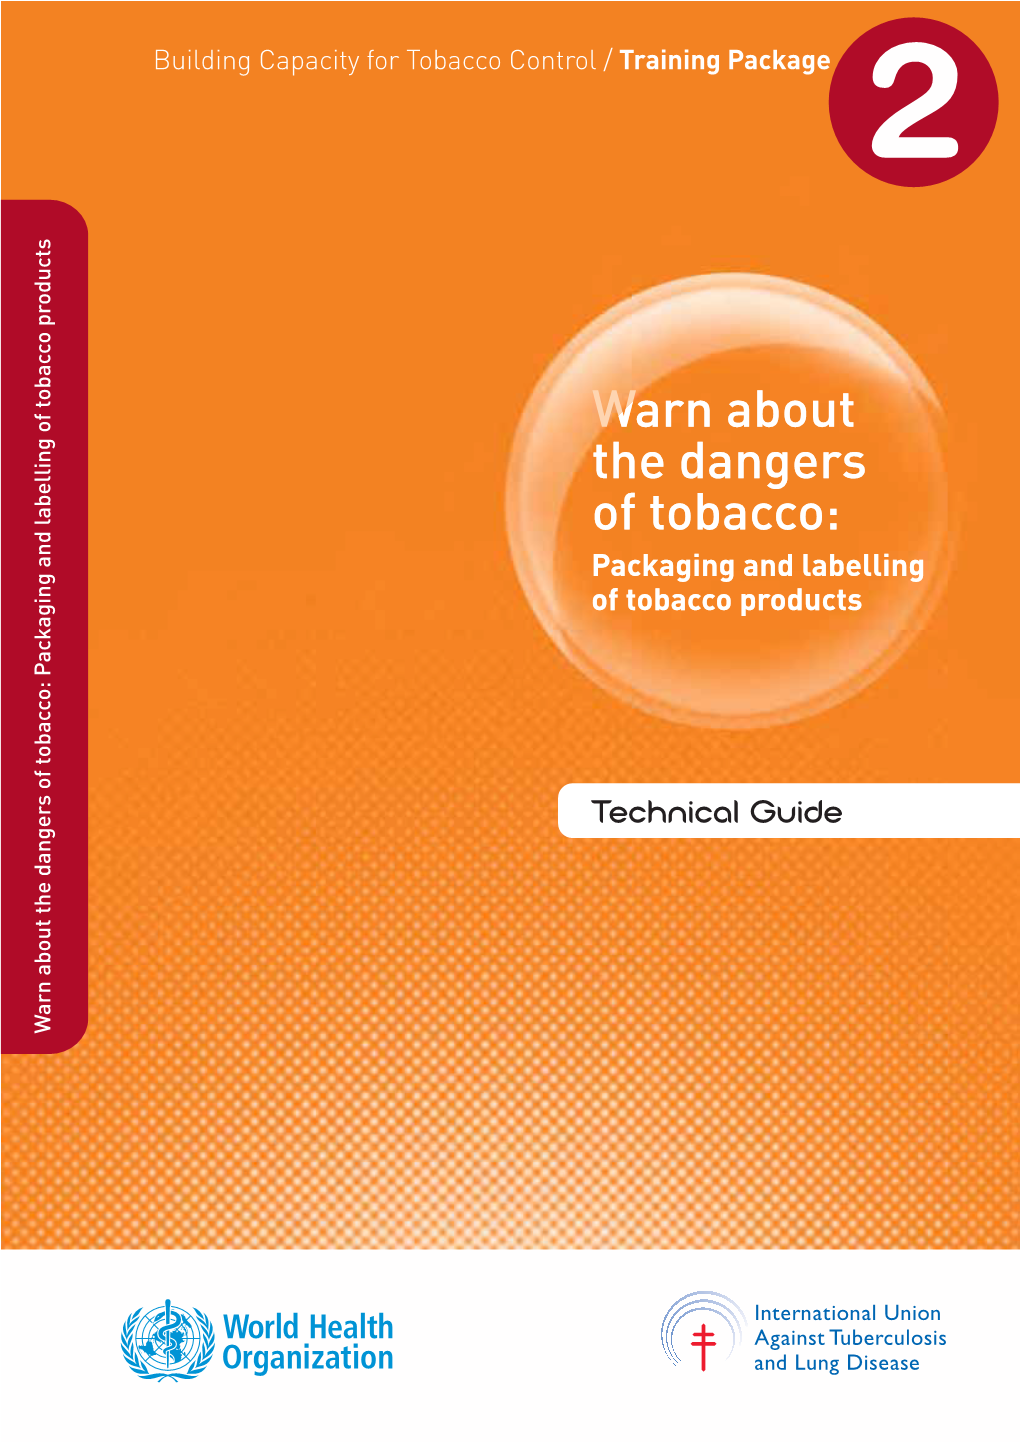 Warn About the Dangers of Tobacco